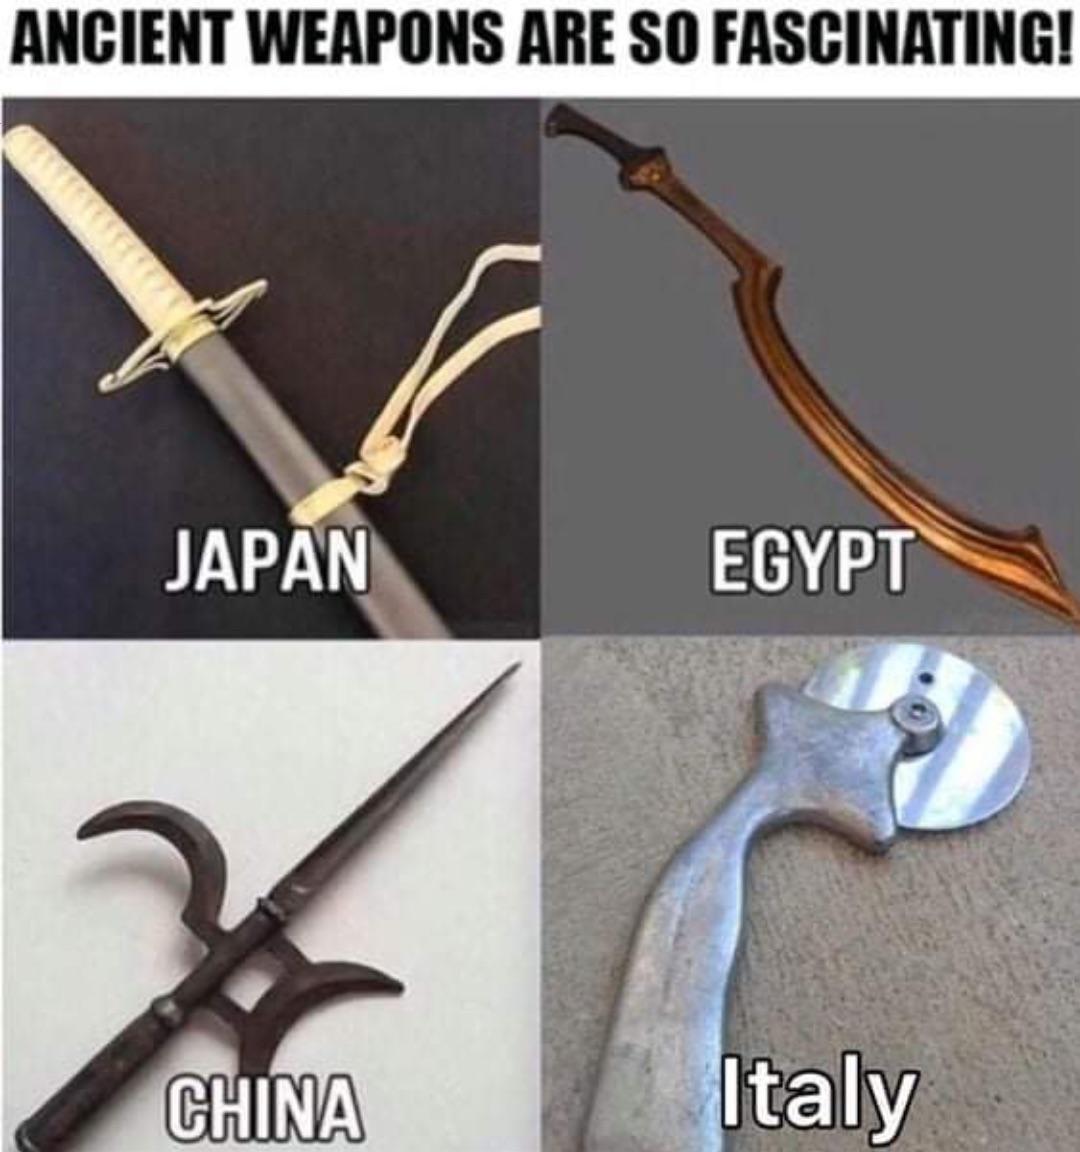 meme stream - ancient weapons meme - Ancient Weapons Are So Fascinating! Japan China Egypt Italy